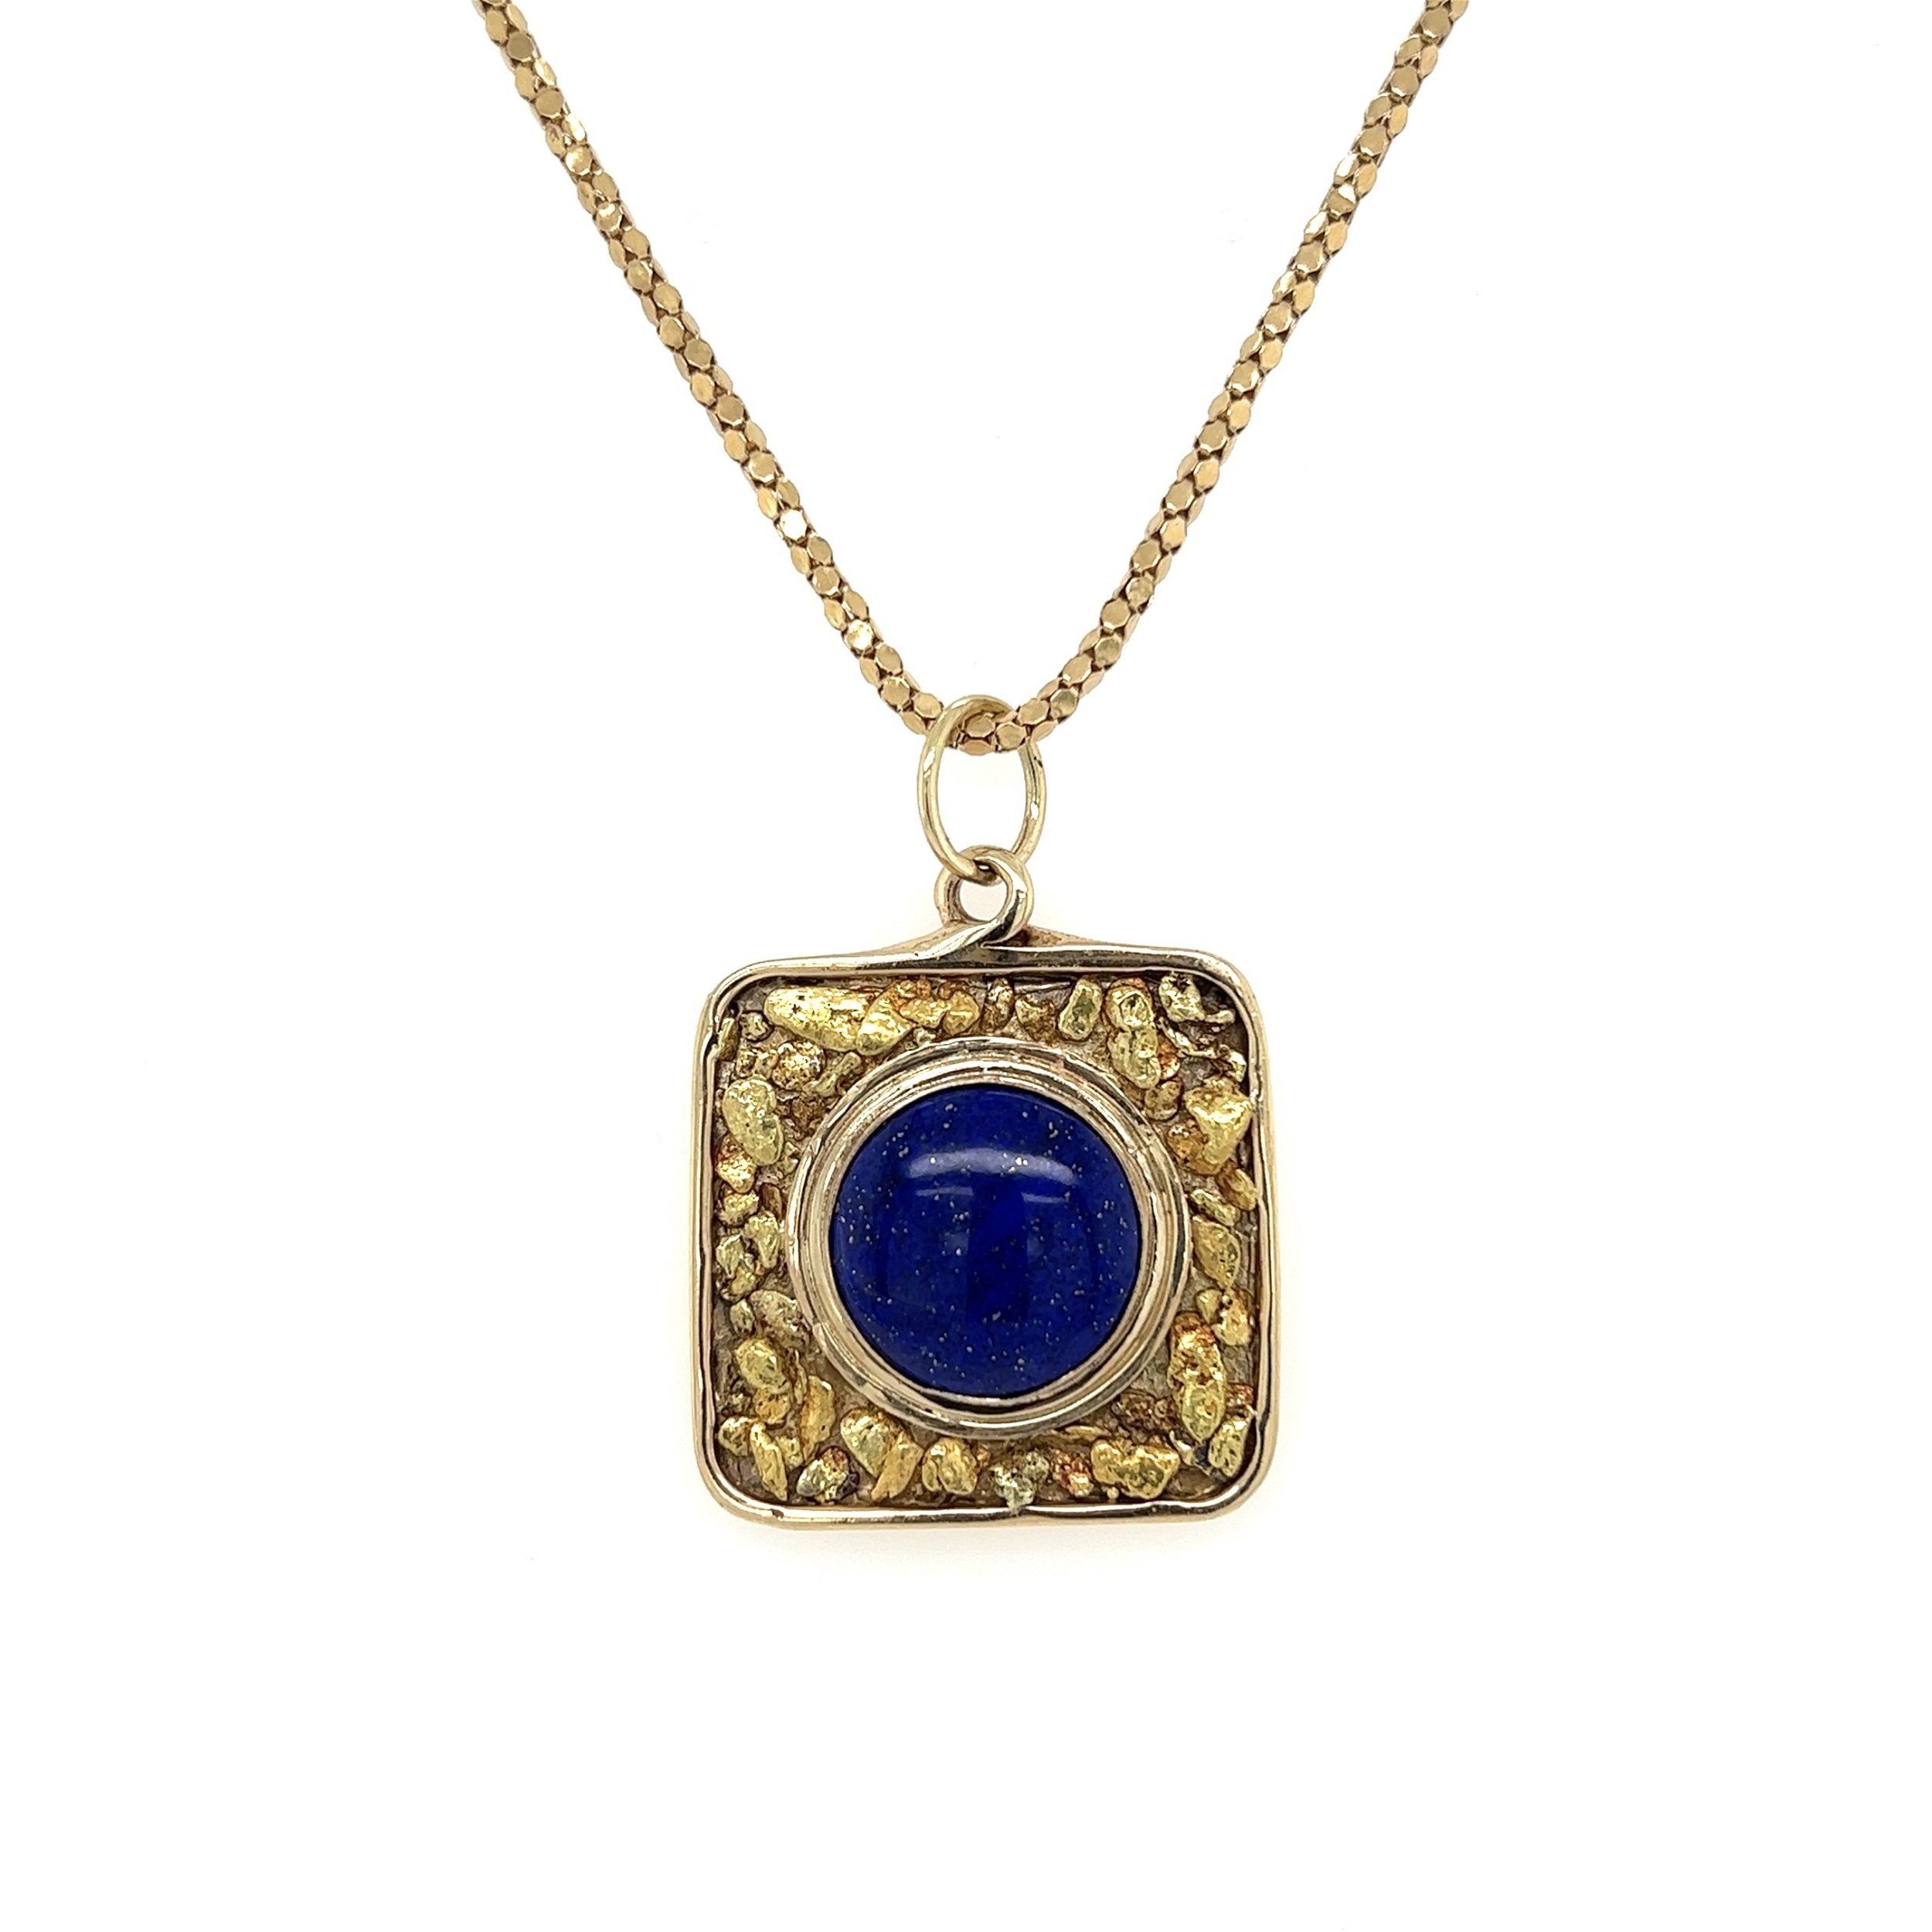 18K YG Square Nugget with Round 3ct Lapis Pendant 23.4g, 30"